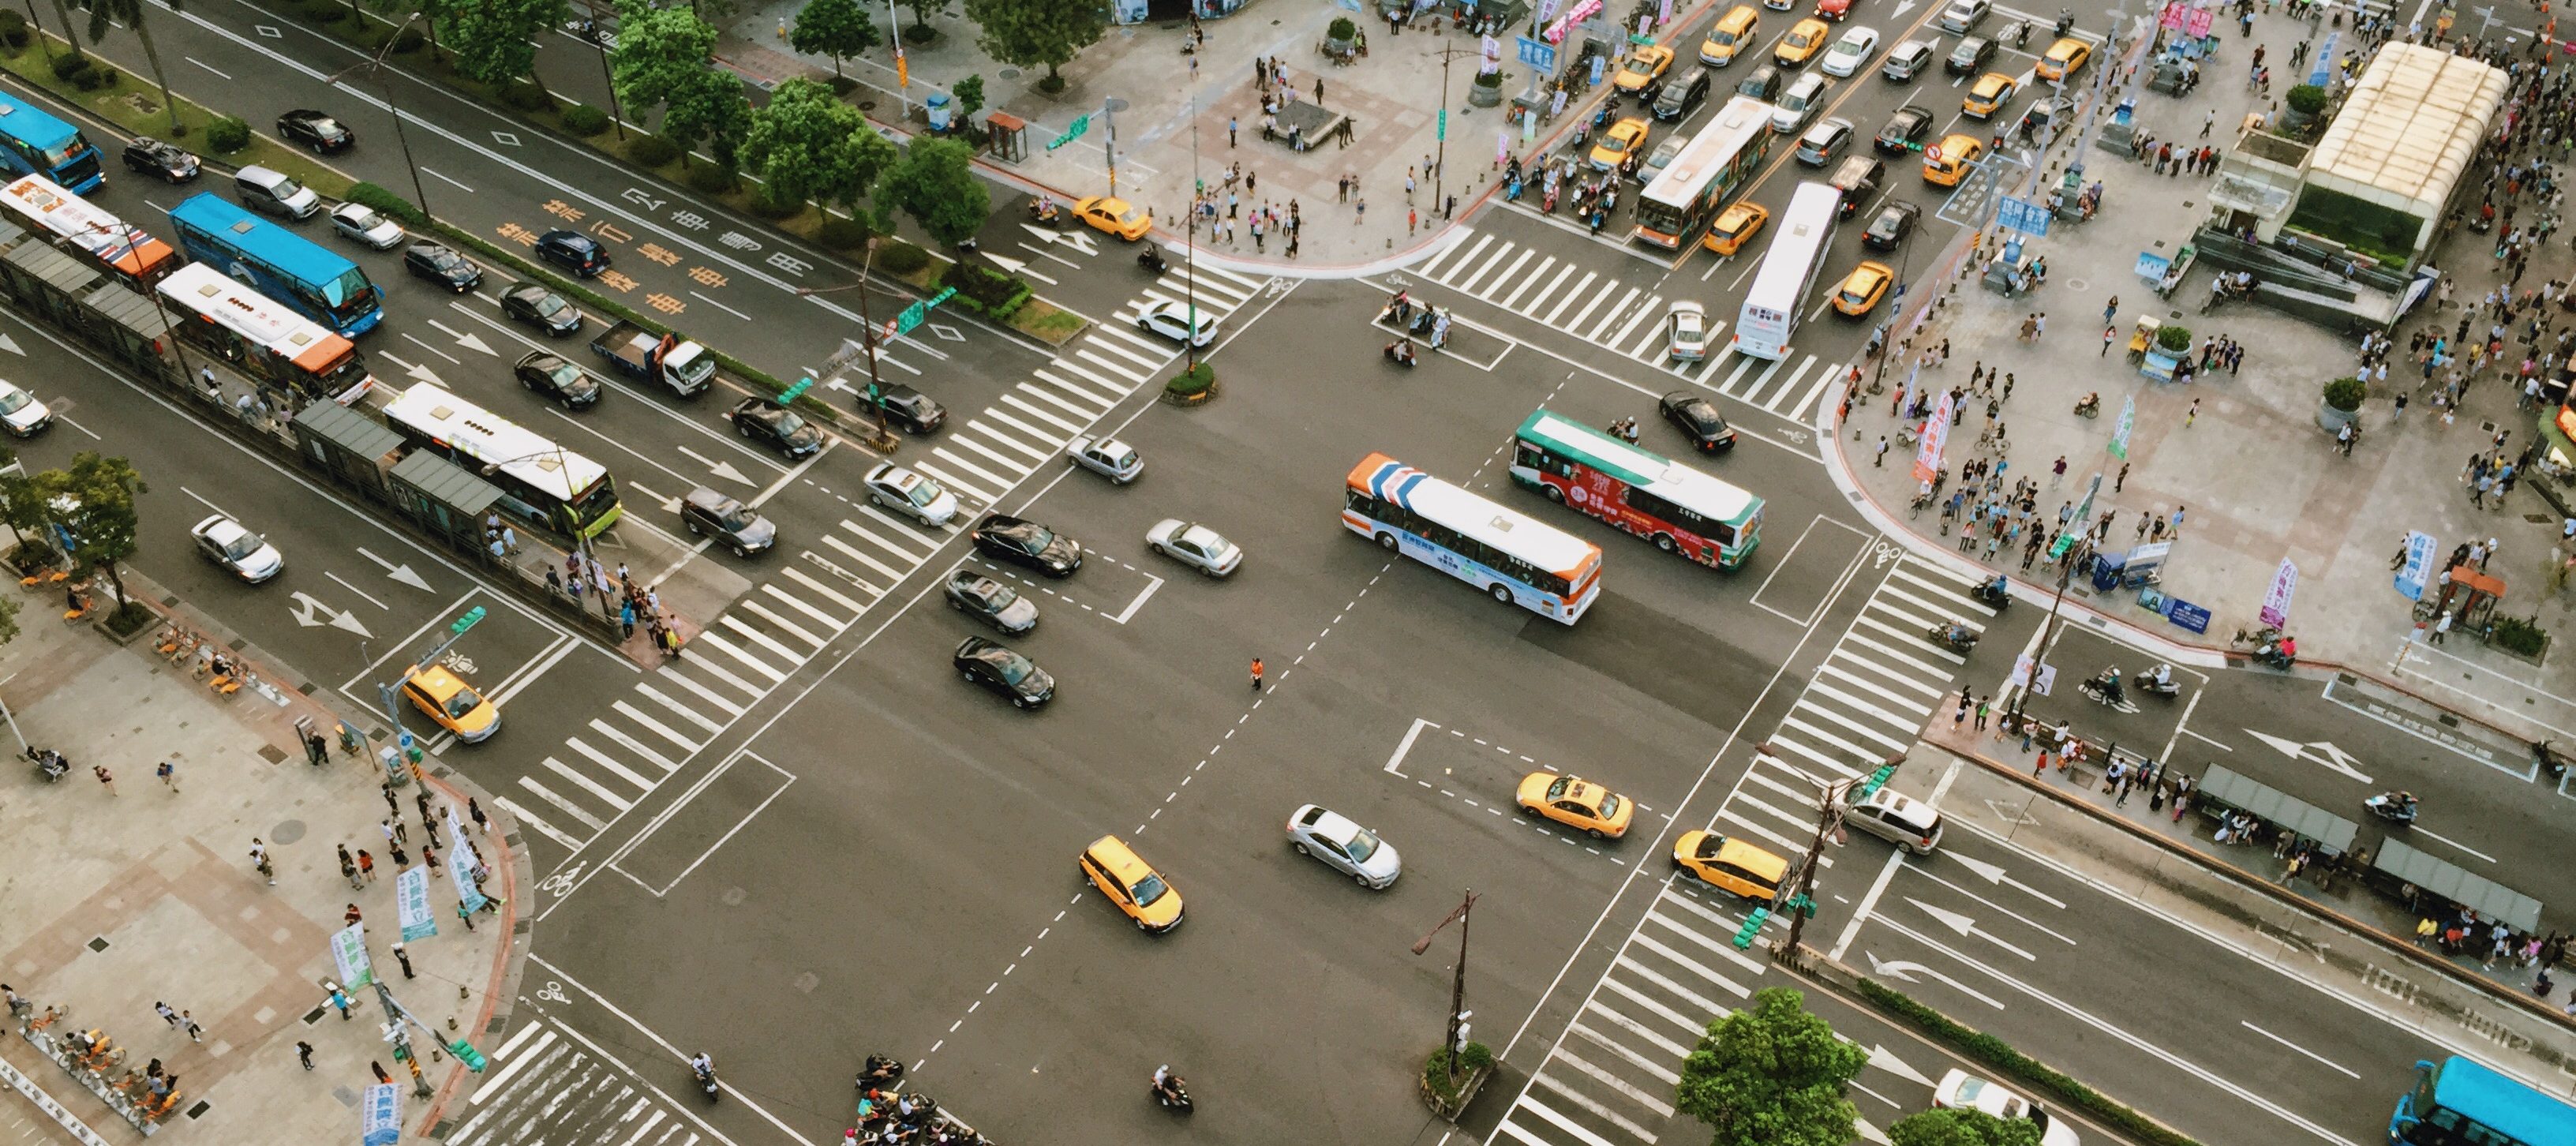 Busy intersection in a city